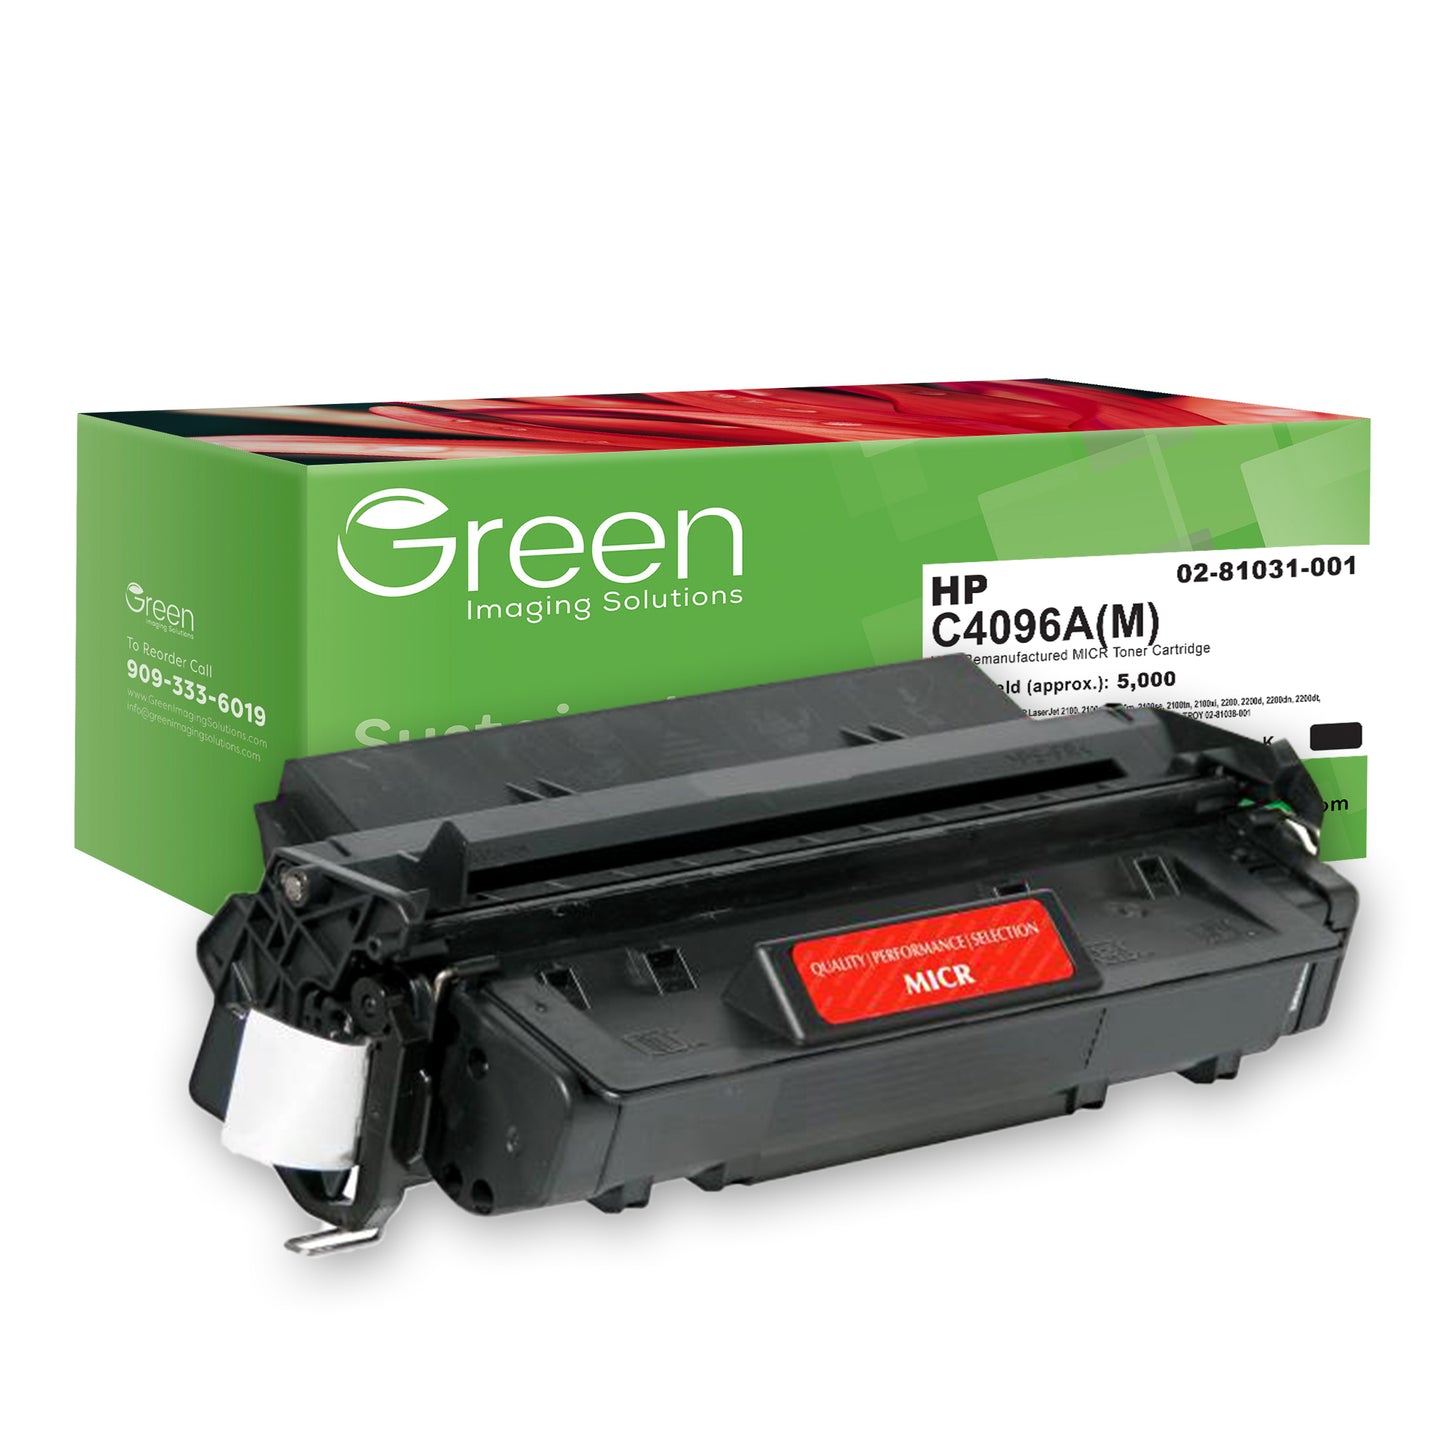 GIS USA Remanufactured MICR Toner Cartridge for HP C4096A, TROY 02-81038-001